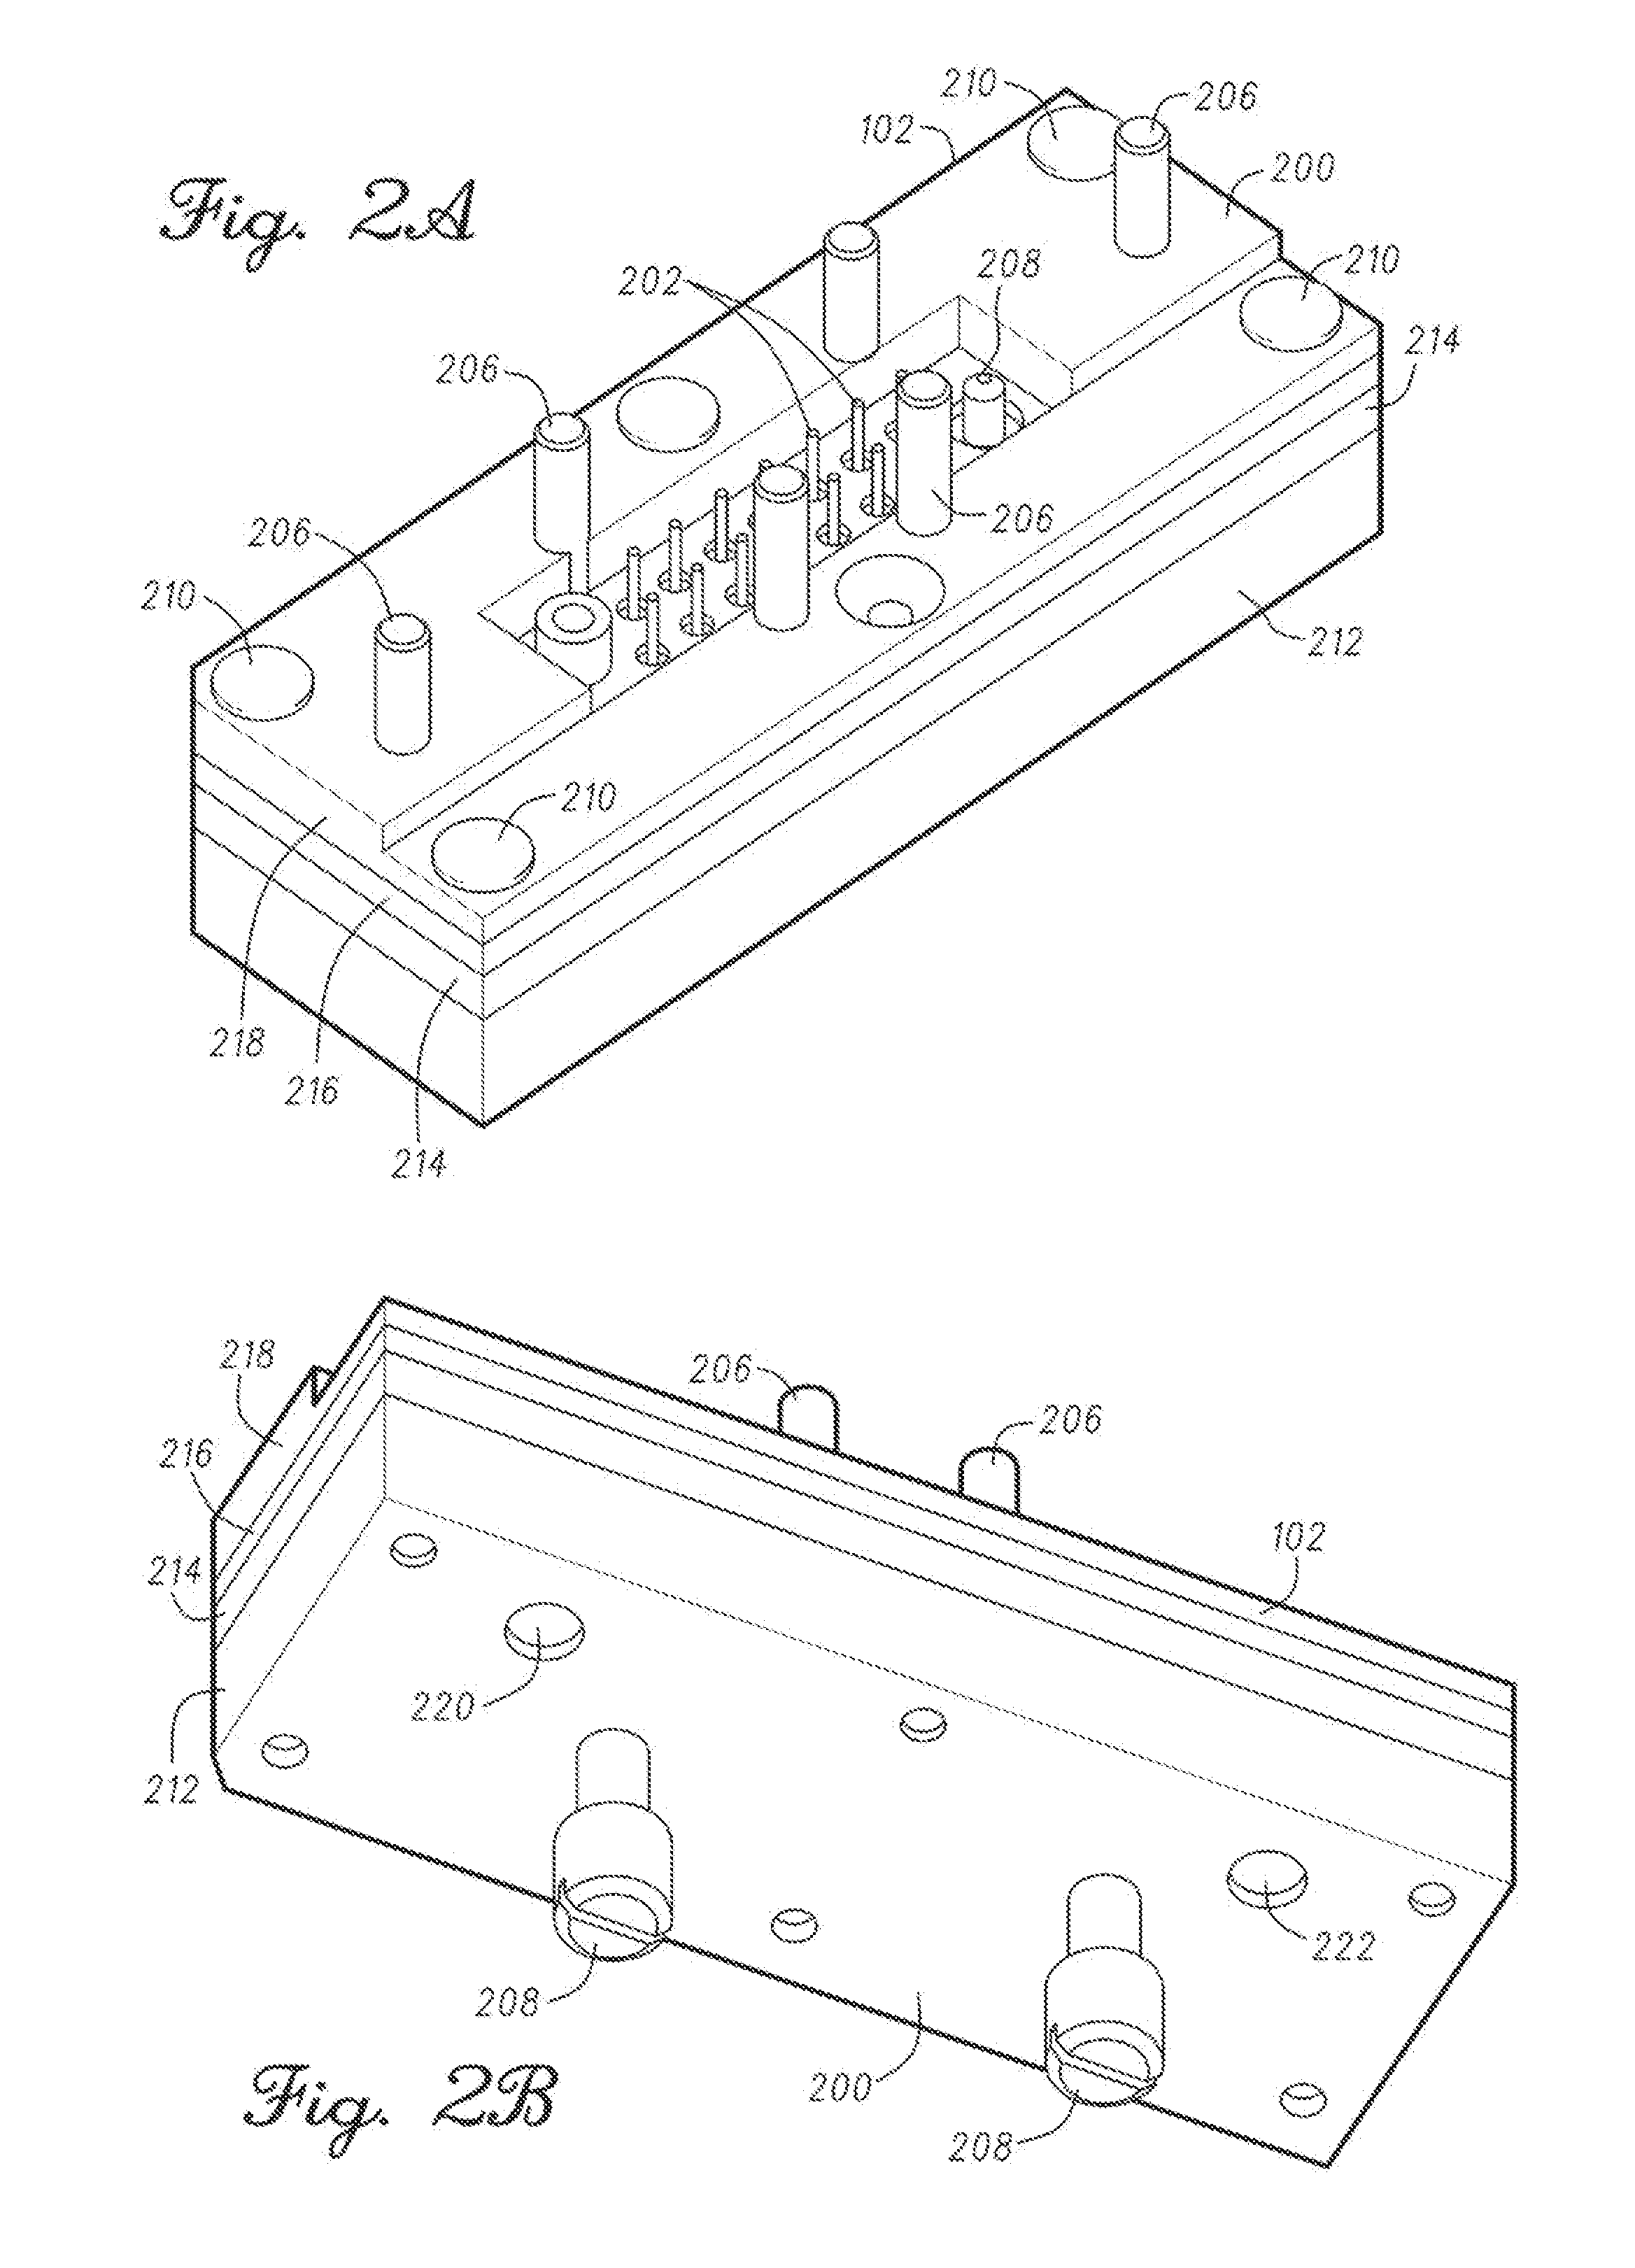 Receptacle cleaning systems and methods for the same